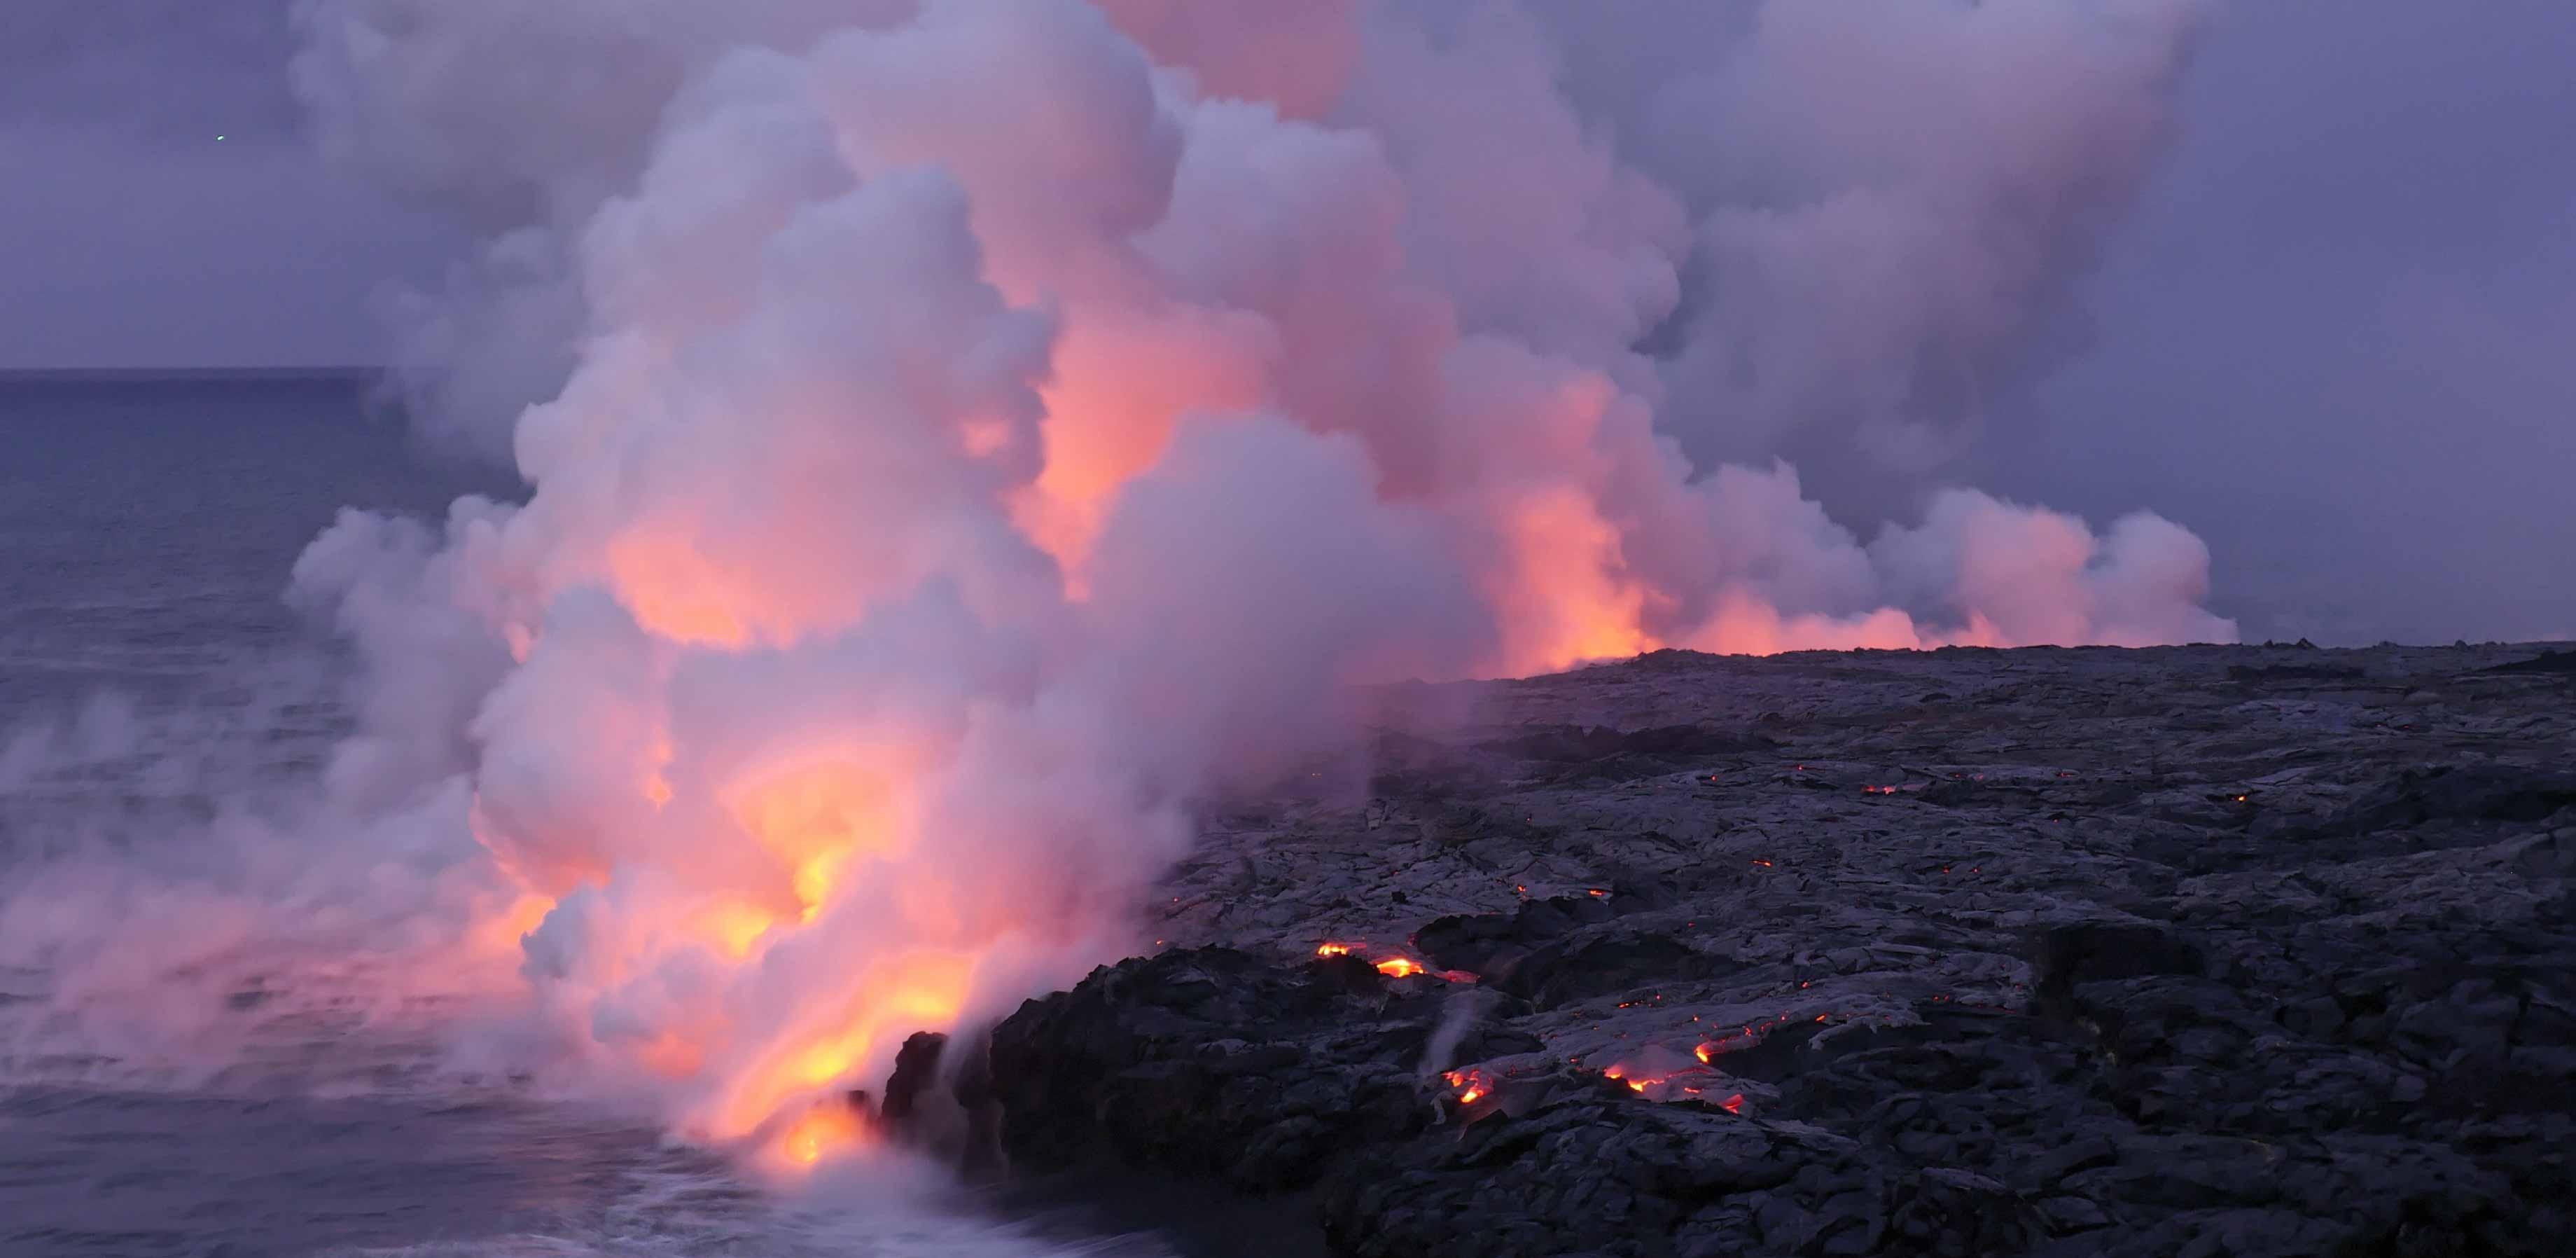 Image of lava flows in Iceland meeting the sea, with incandescent steam lofting